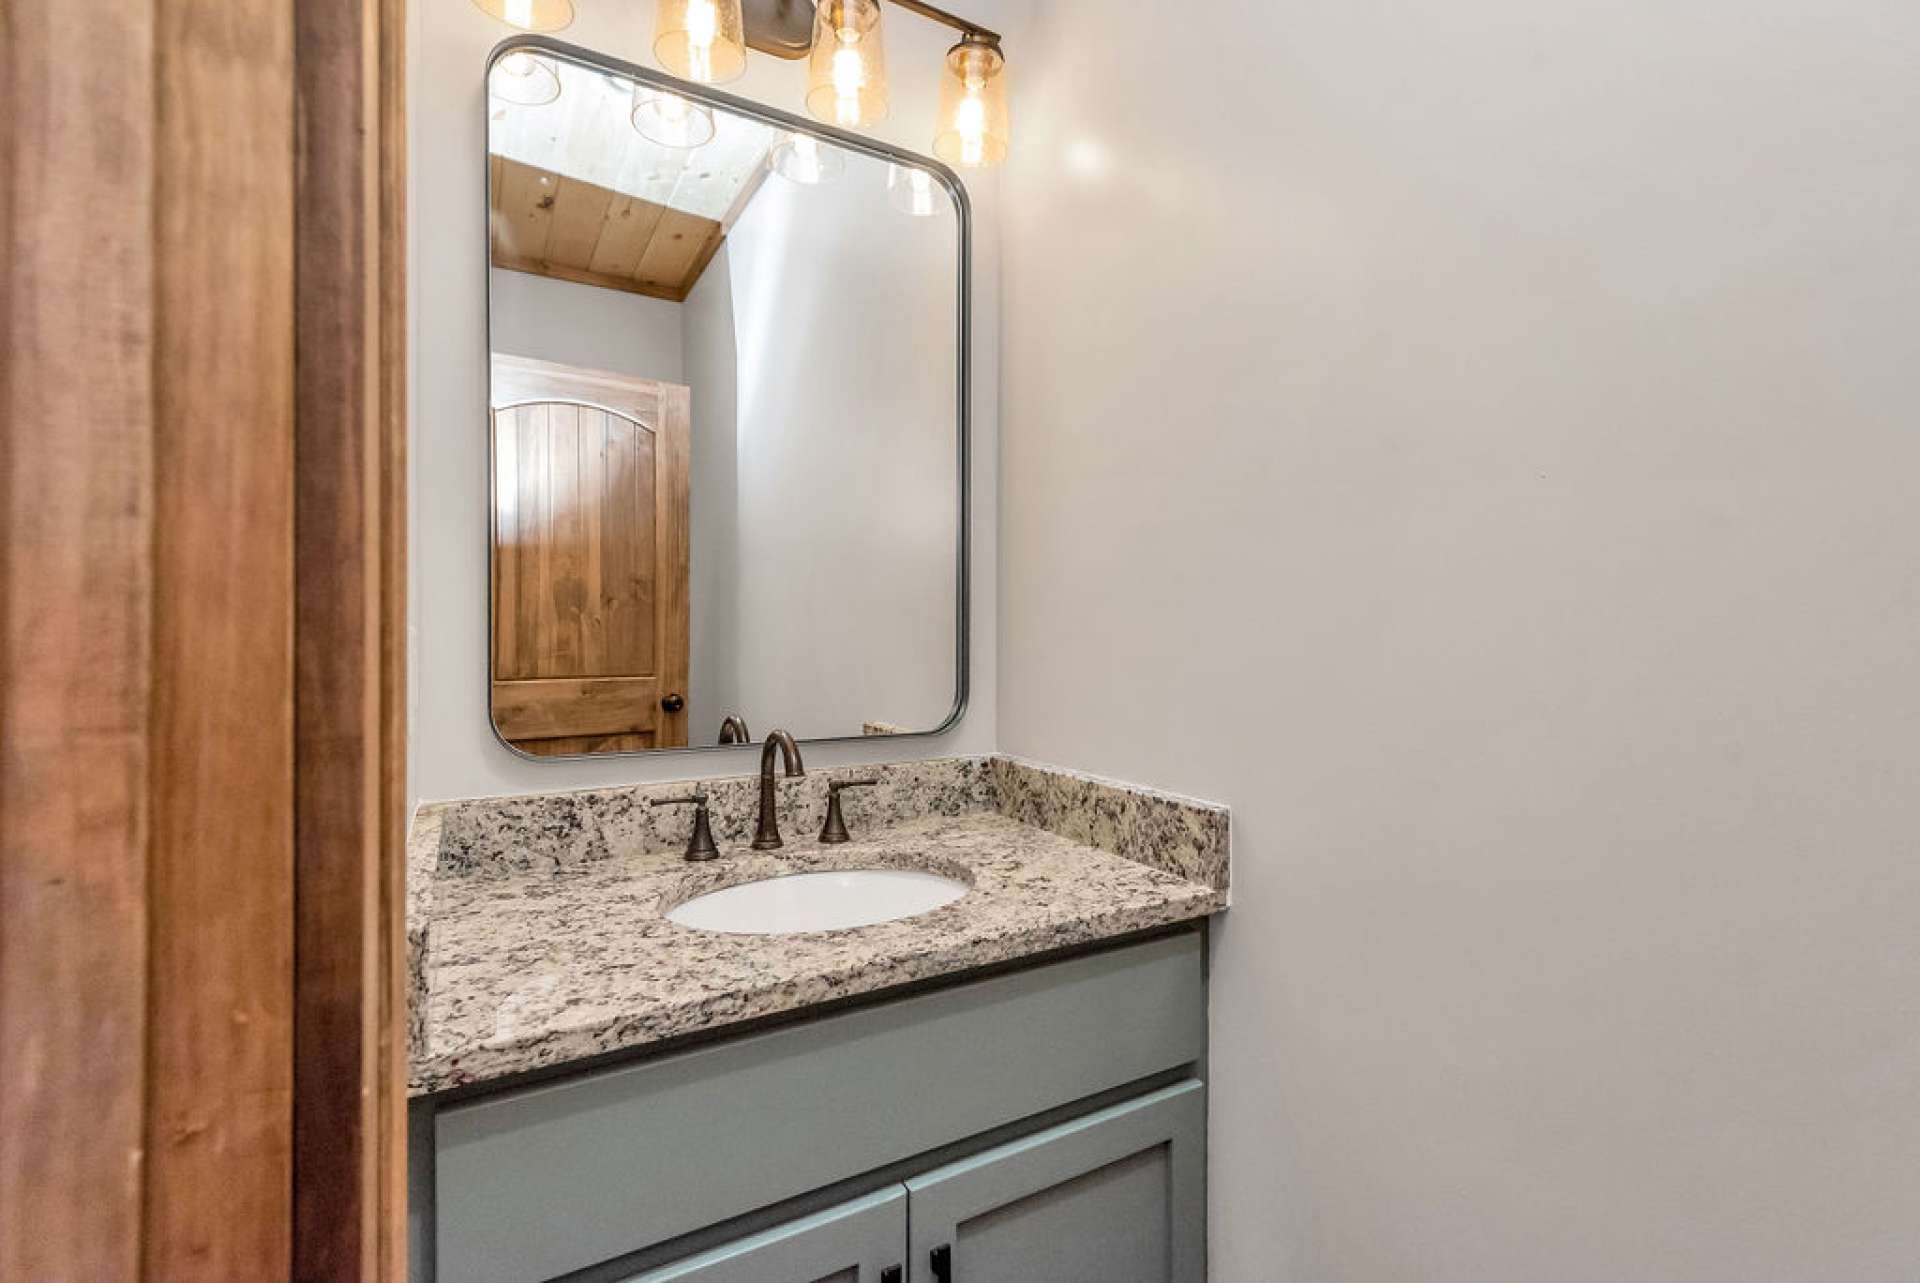 Main level also offers a powder room for your guests.